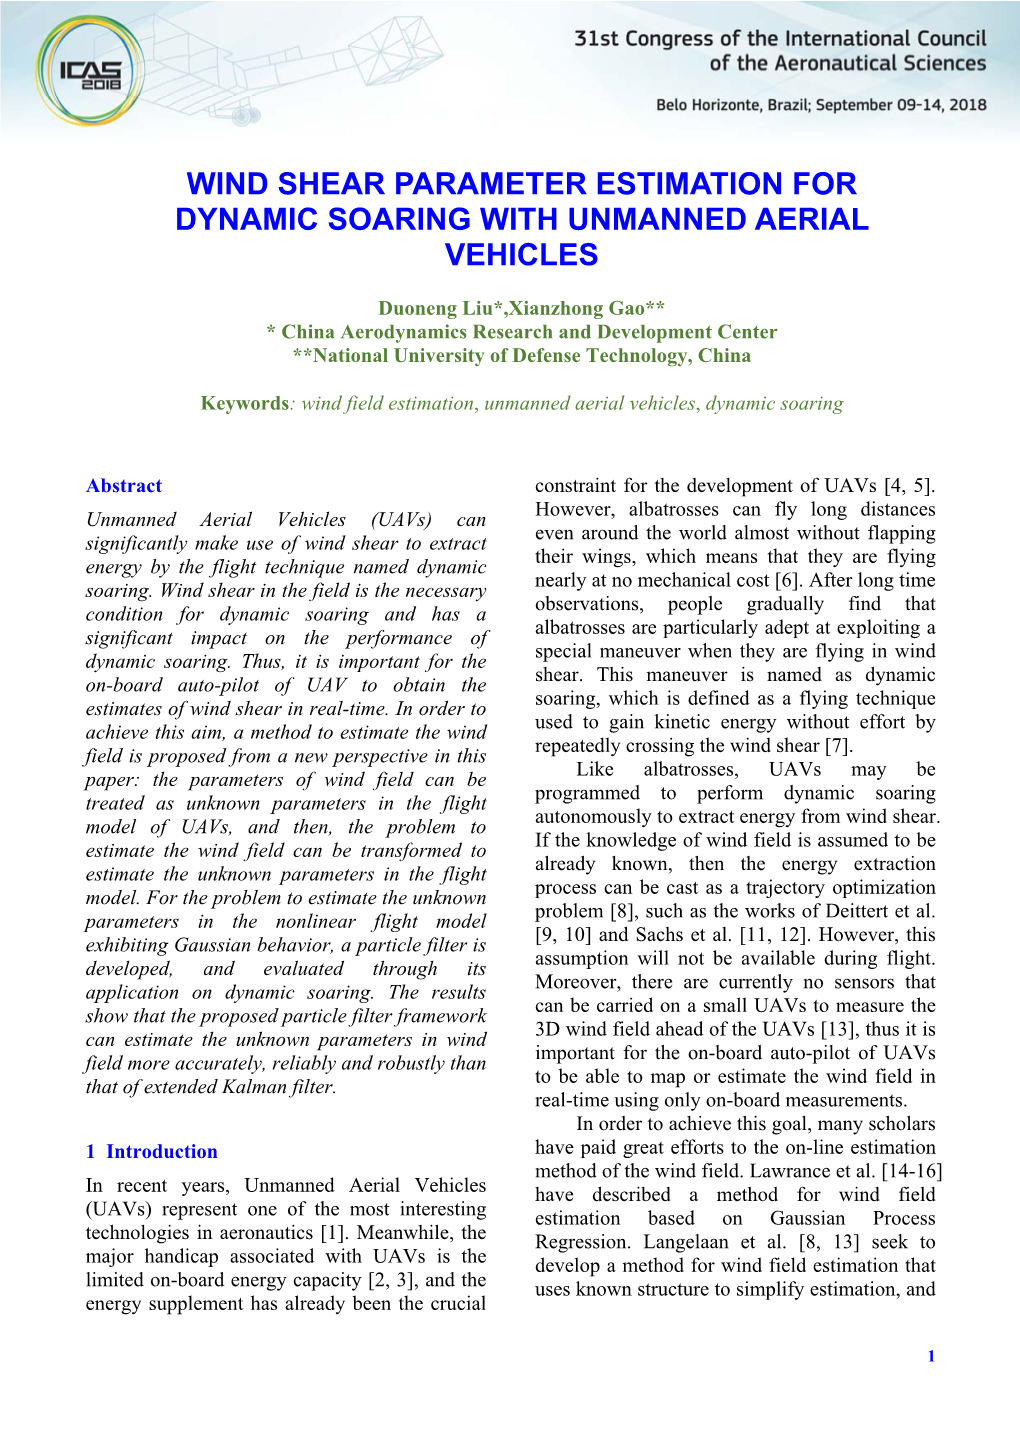 Wind Shear Parameter Estimation for Dynamic Soaring with Unmanned Aerial Vehicles